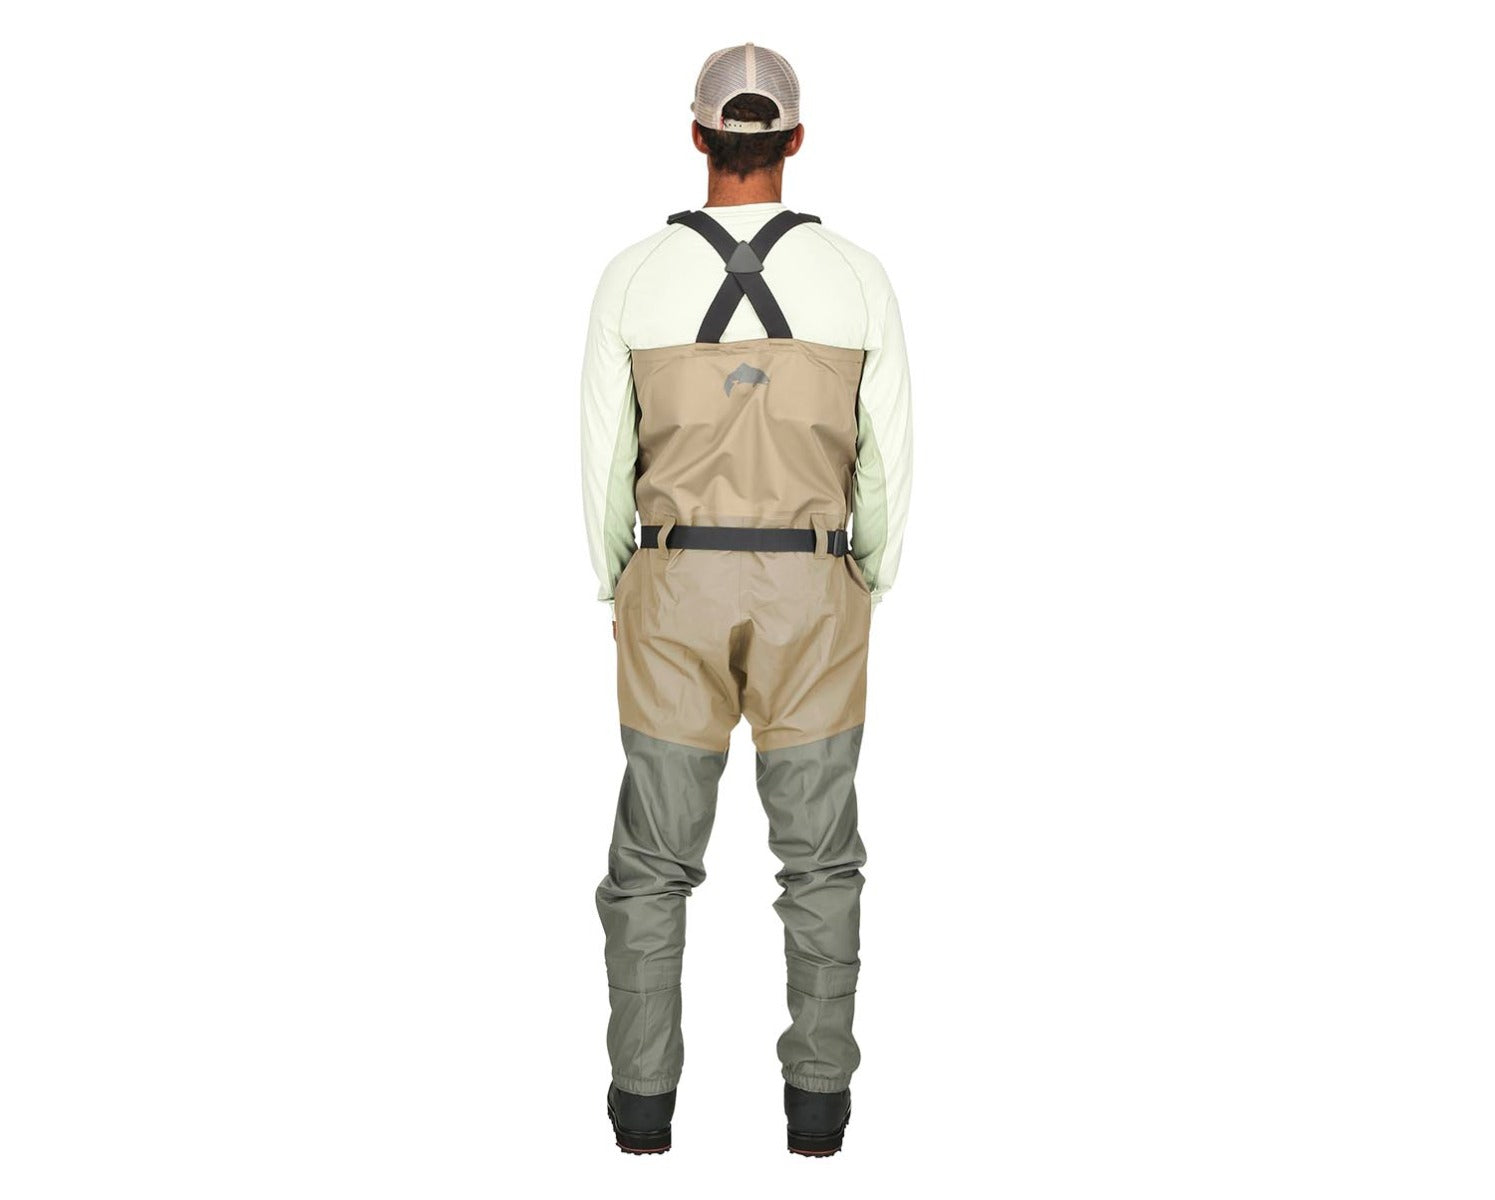 Simms Tributary Waders Tan -  - Mansfield Hunting & Fishing - Products to prepare for Corona Virus